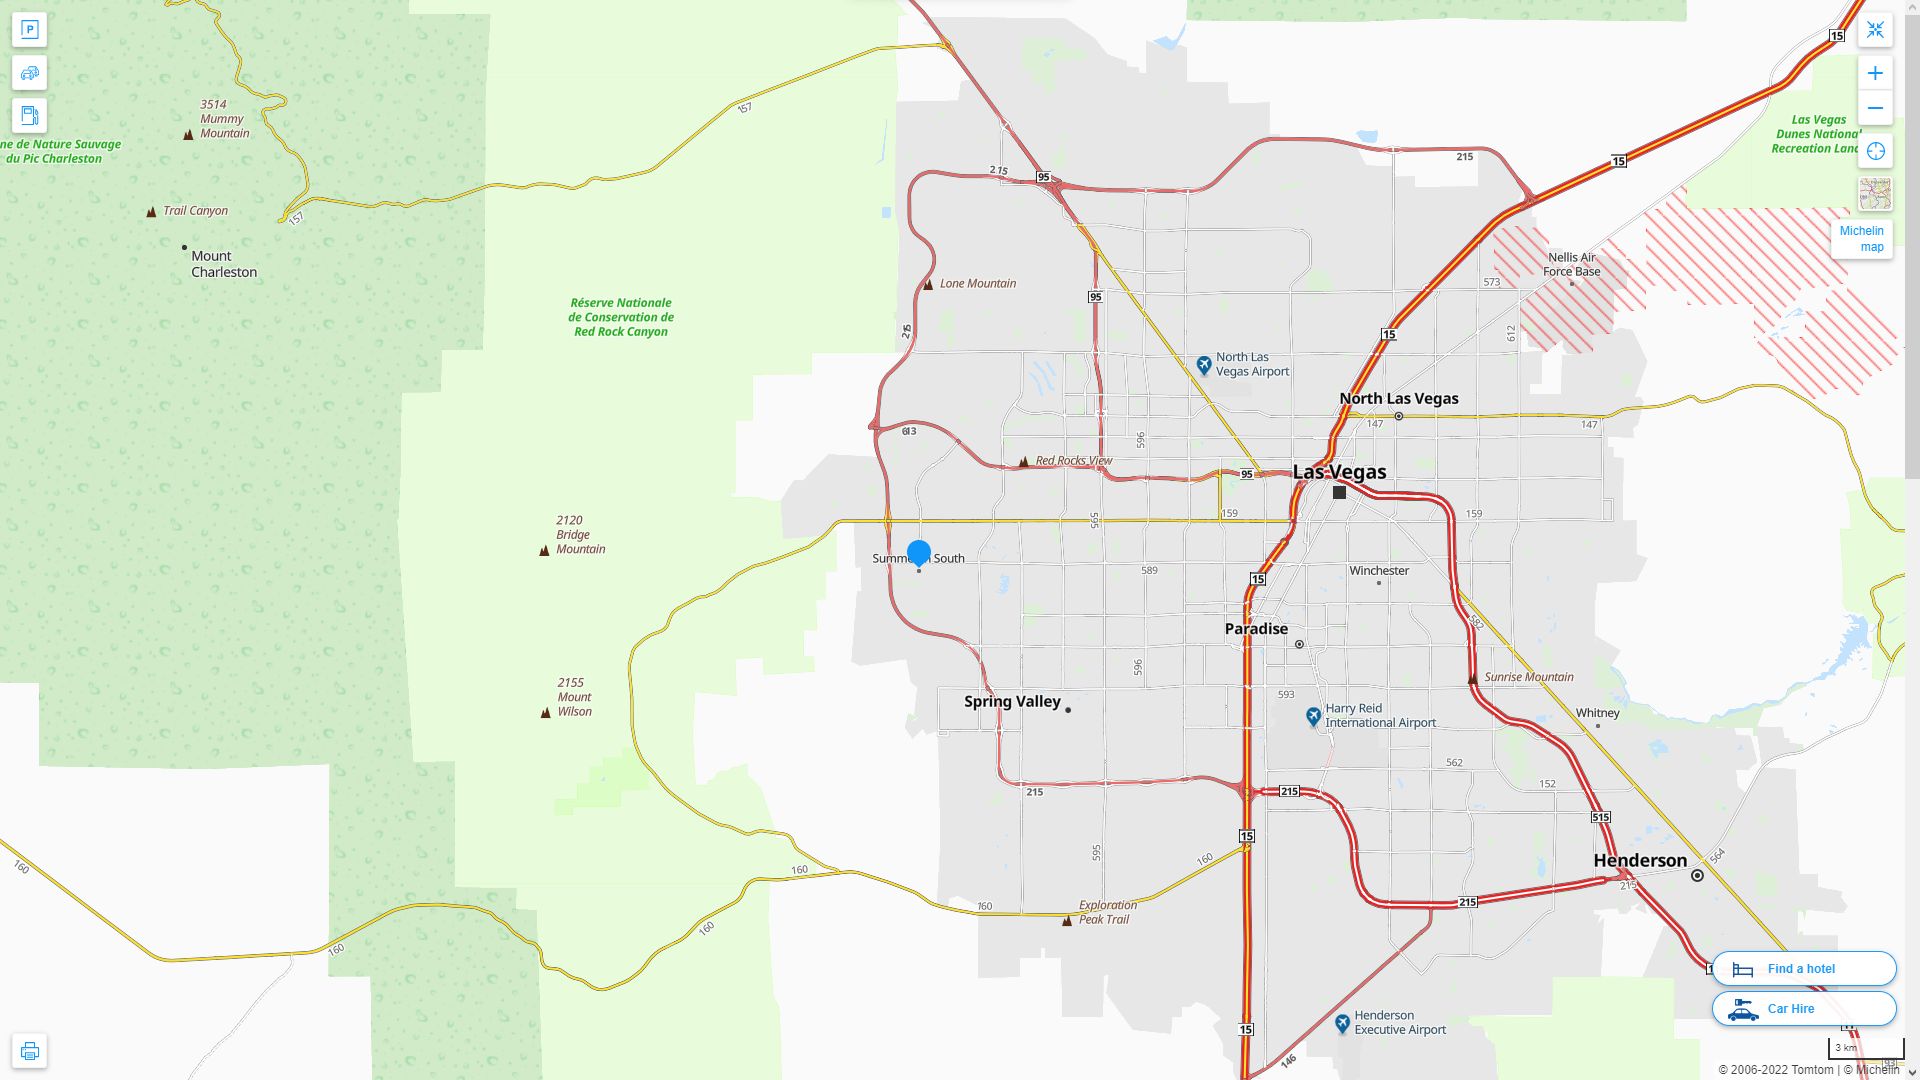 Summerlin South Nevada Highway and Road Map